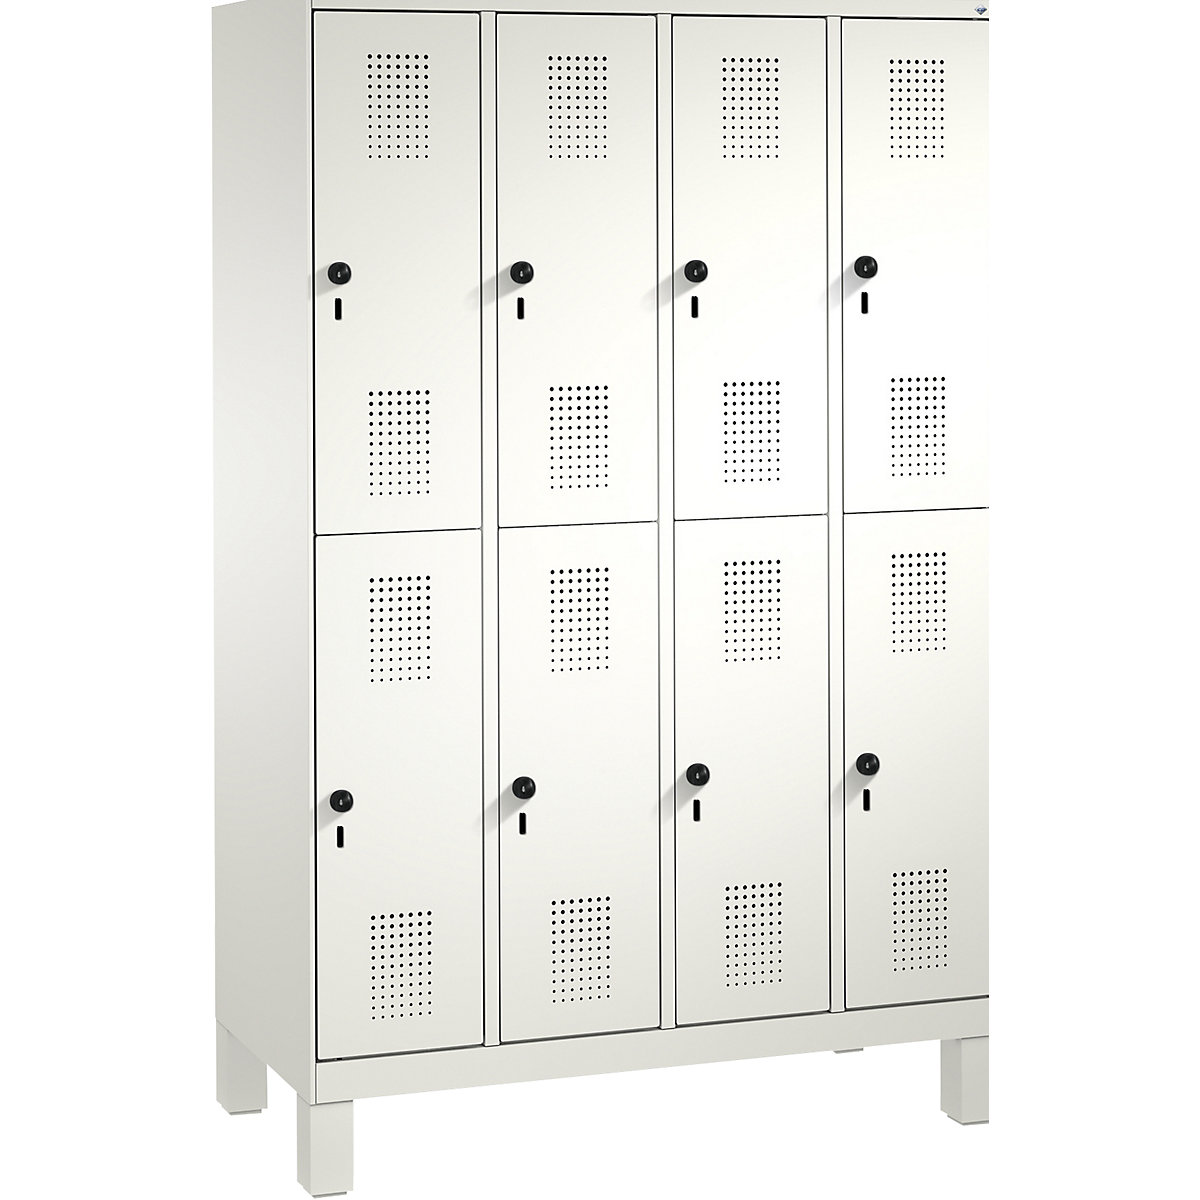 EVOLO cloakroom locker, double tier, with feet – C+P, 4 compartments, 2 shelf compartments each, compartment width 300 mm, traffic white / traffic white-14